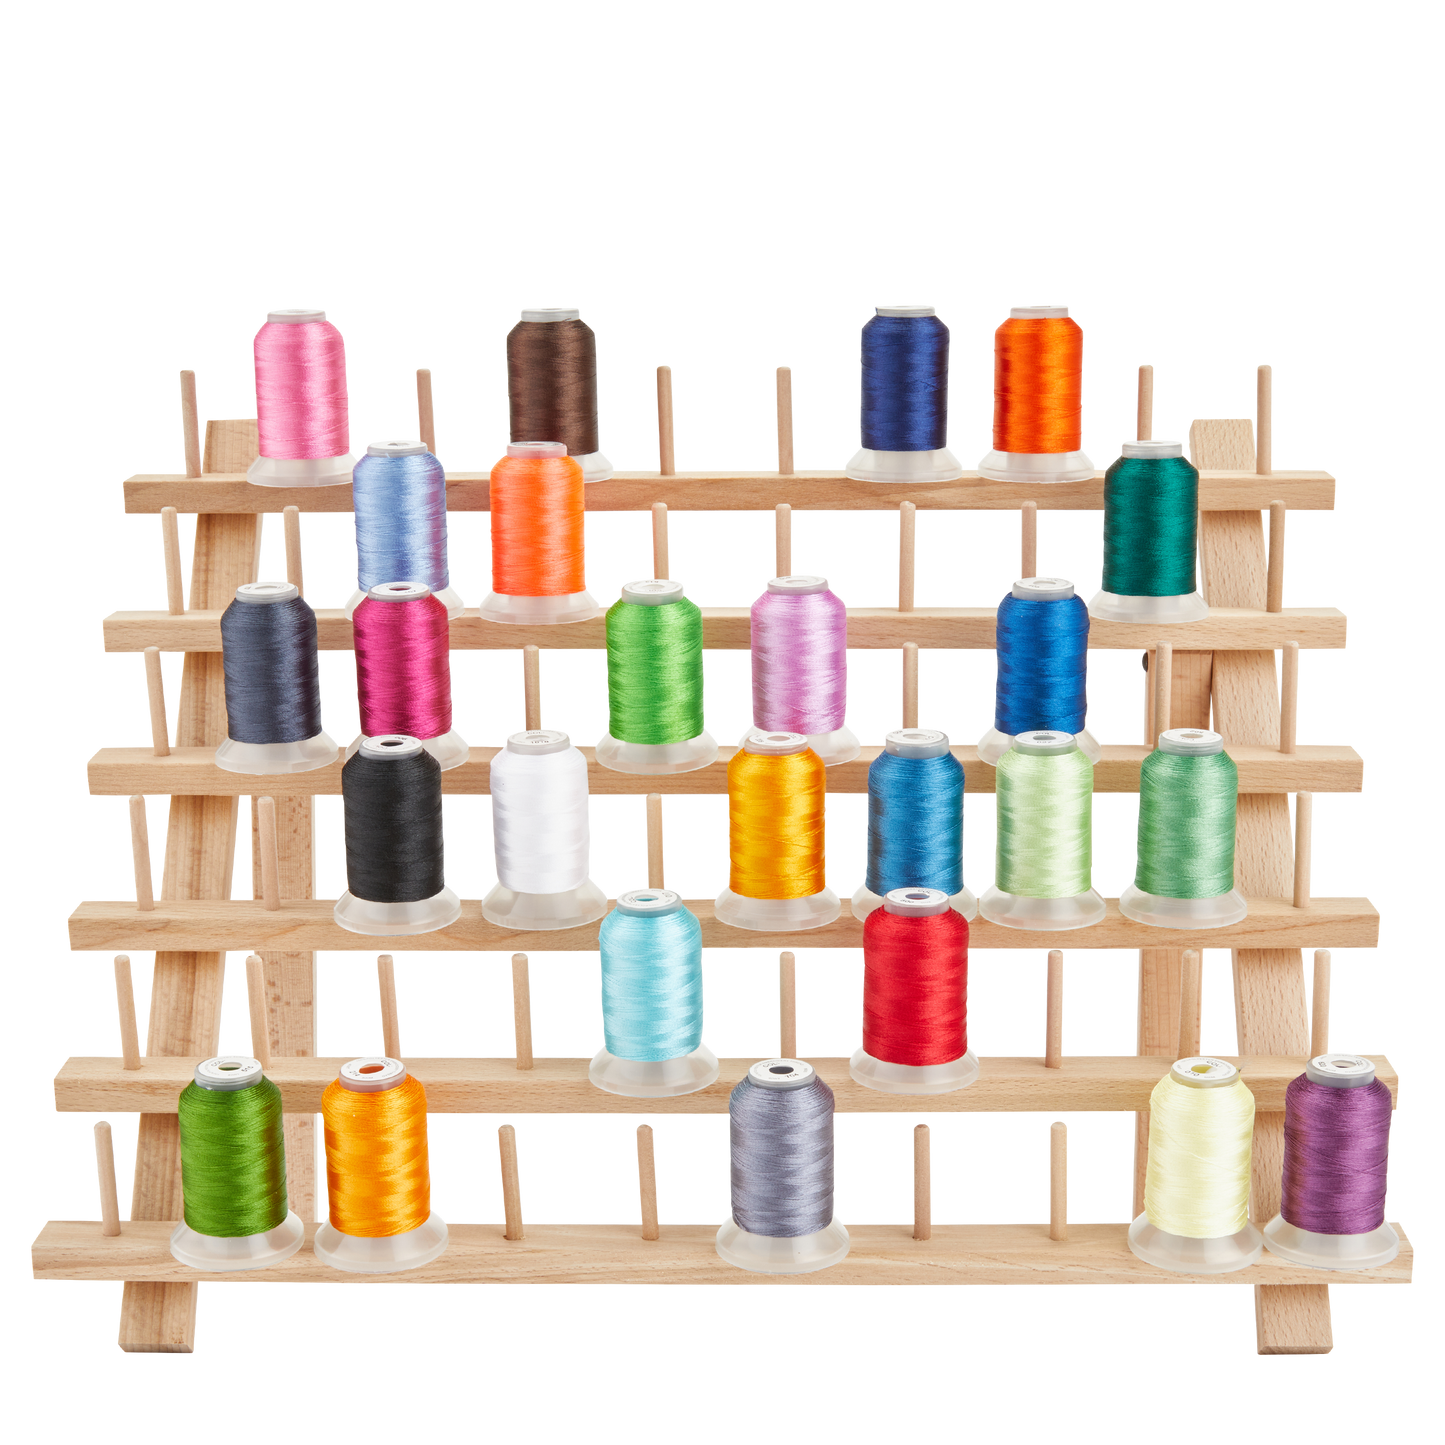  60 Spools Wooden Thread Rack Embroidery Thread Holder Foldable  Thread Stand Rack Holds Organizer Wall Mount Sewing Storage Holder for  Sewing, Quilting